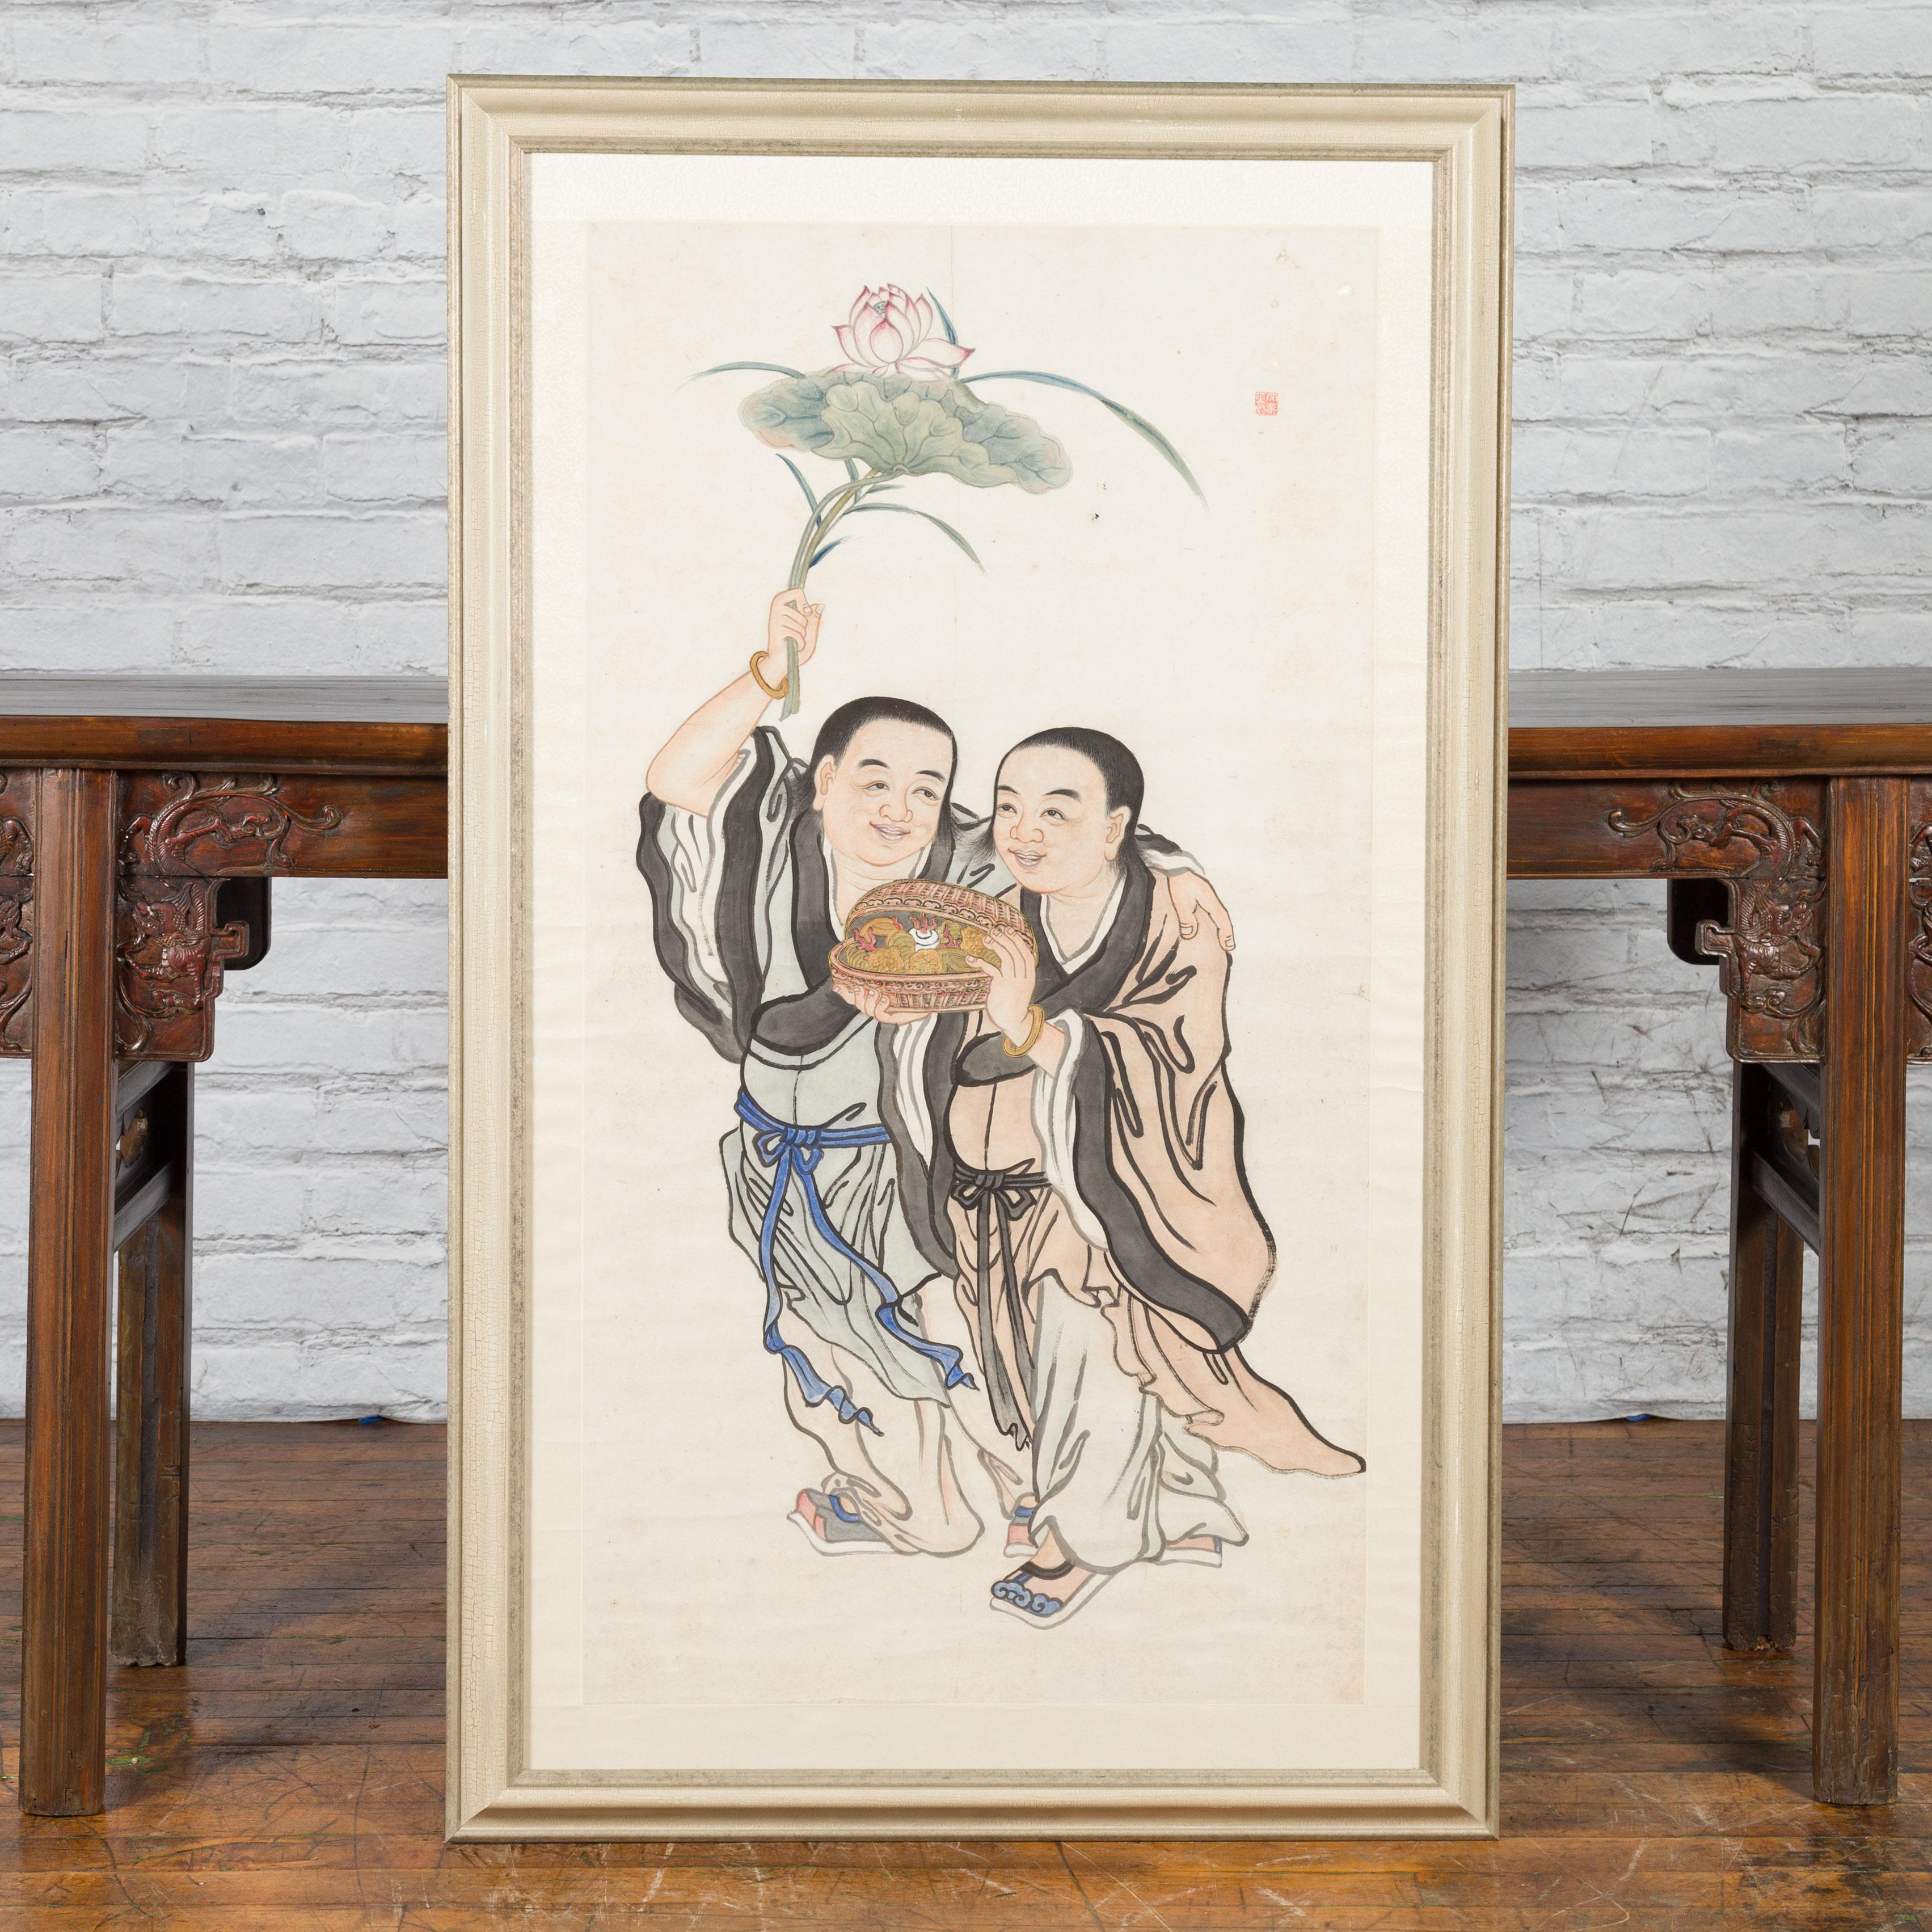 A Japanese framed painting from the 19th century depicting two walking Buddhist monks holding a lotus flower and a wicker box, in custom frame. Created in Japan during the 19th century, this vertical linen canvas painting depicts two Buddhist monks